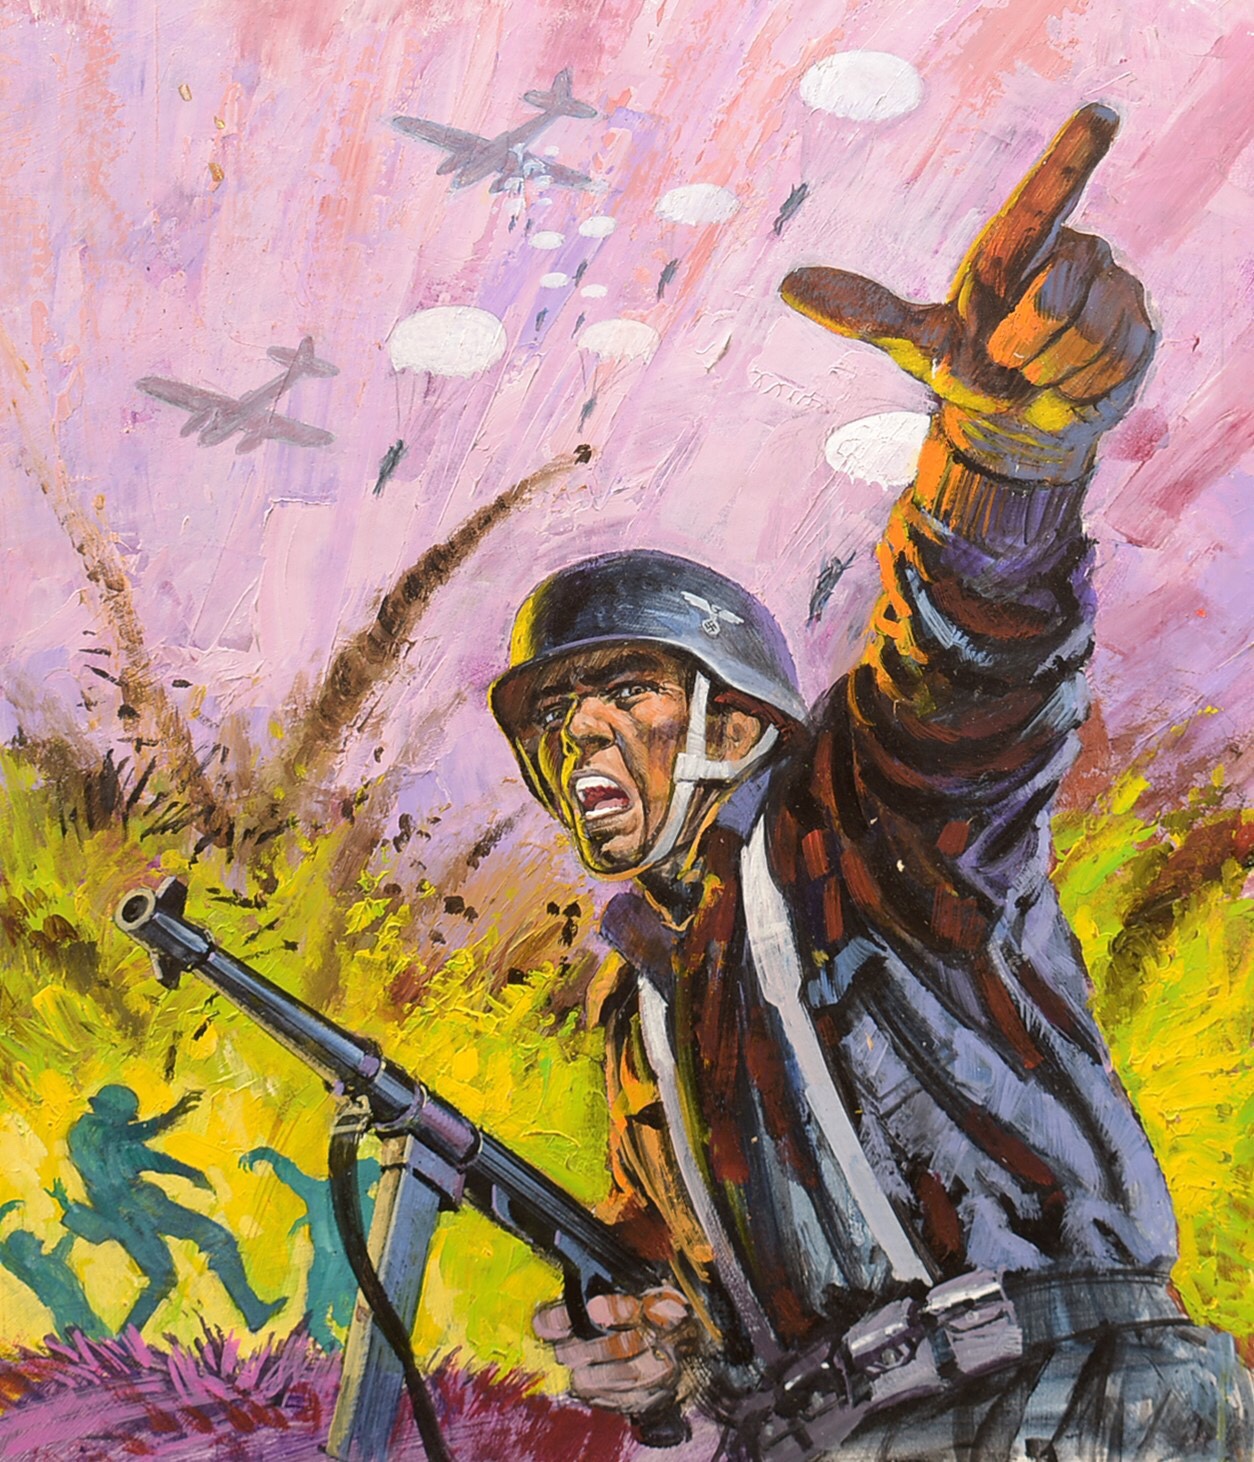 Original Art Work for the front cover of War Picture Library, No. 572 'Soldier Breed', by Vincente Alcazar, gouache on board, image size 42 x 32cms